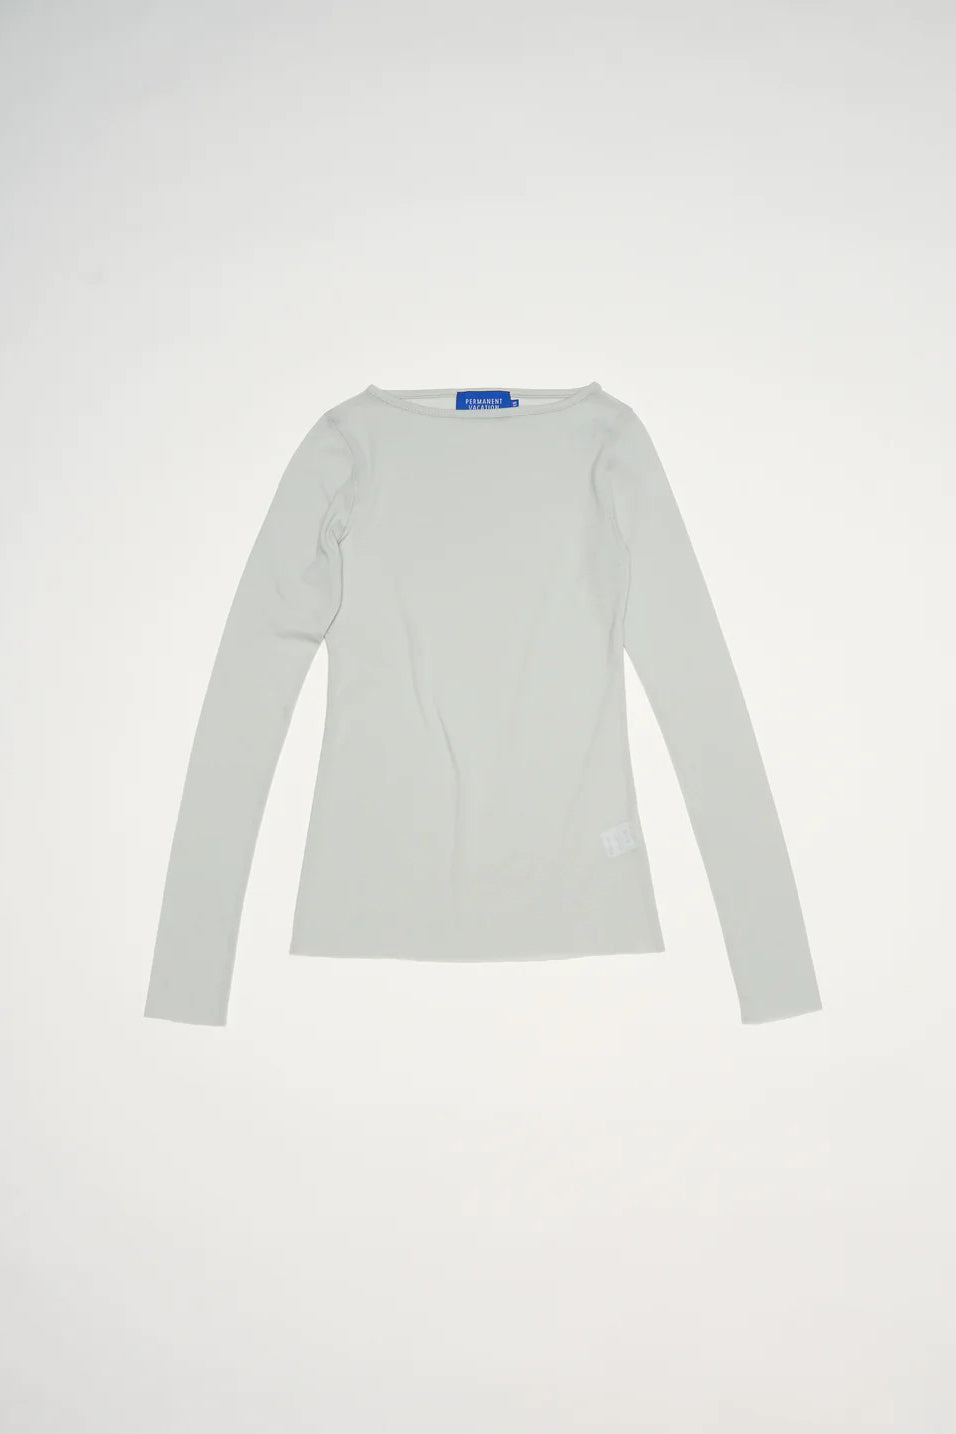 PV Connection Top // Blue Tint